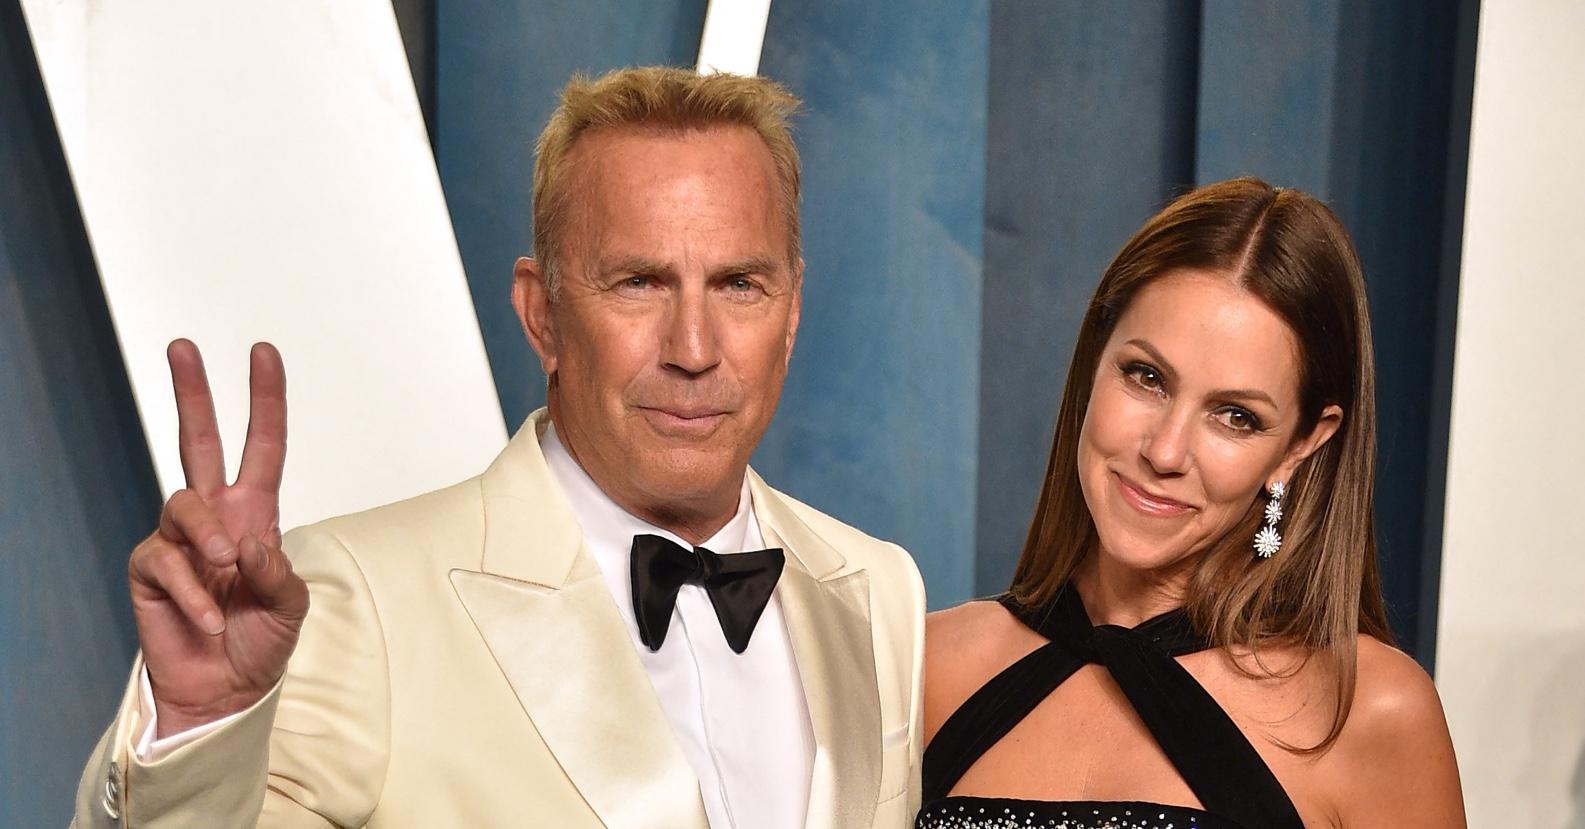 Kevin Costner Wears Wedding Ring 1 Day Before Wife Filed For Divorce image photo pic